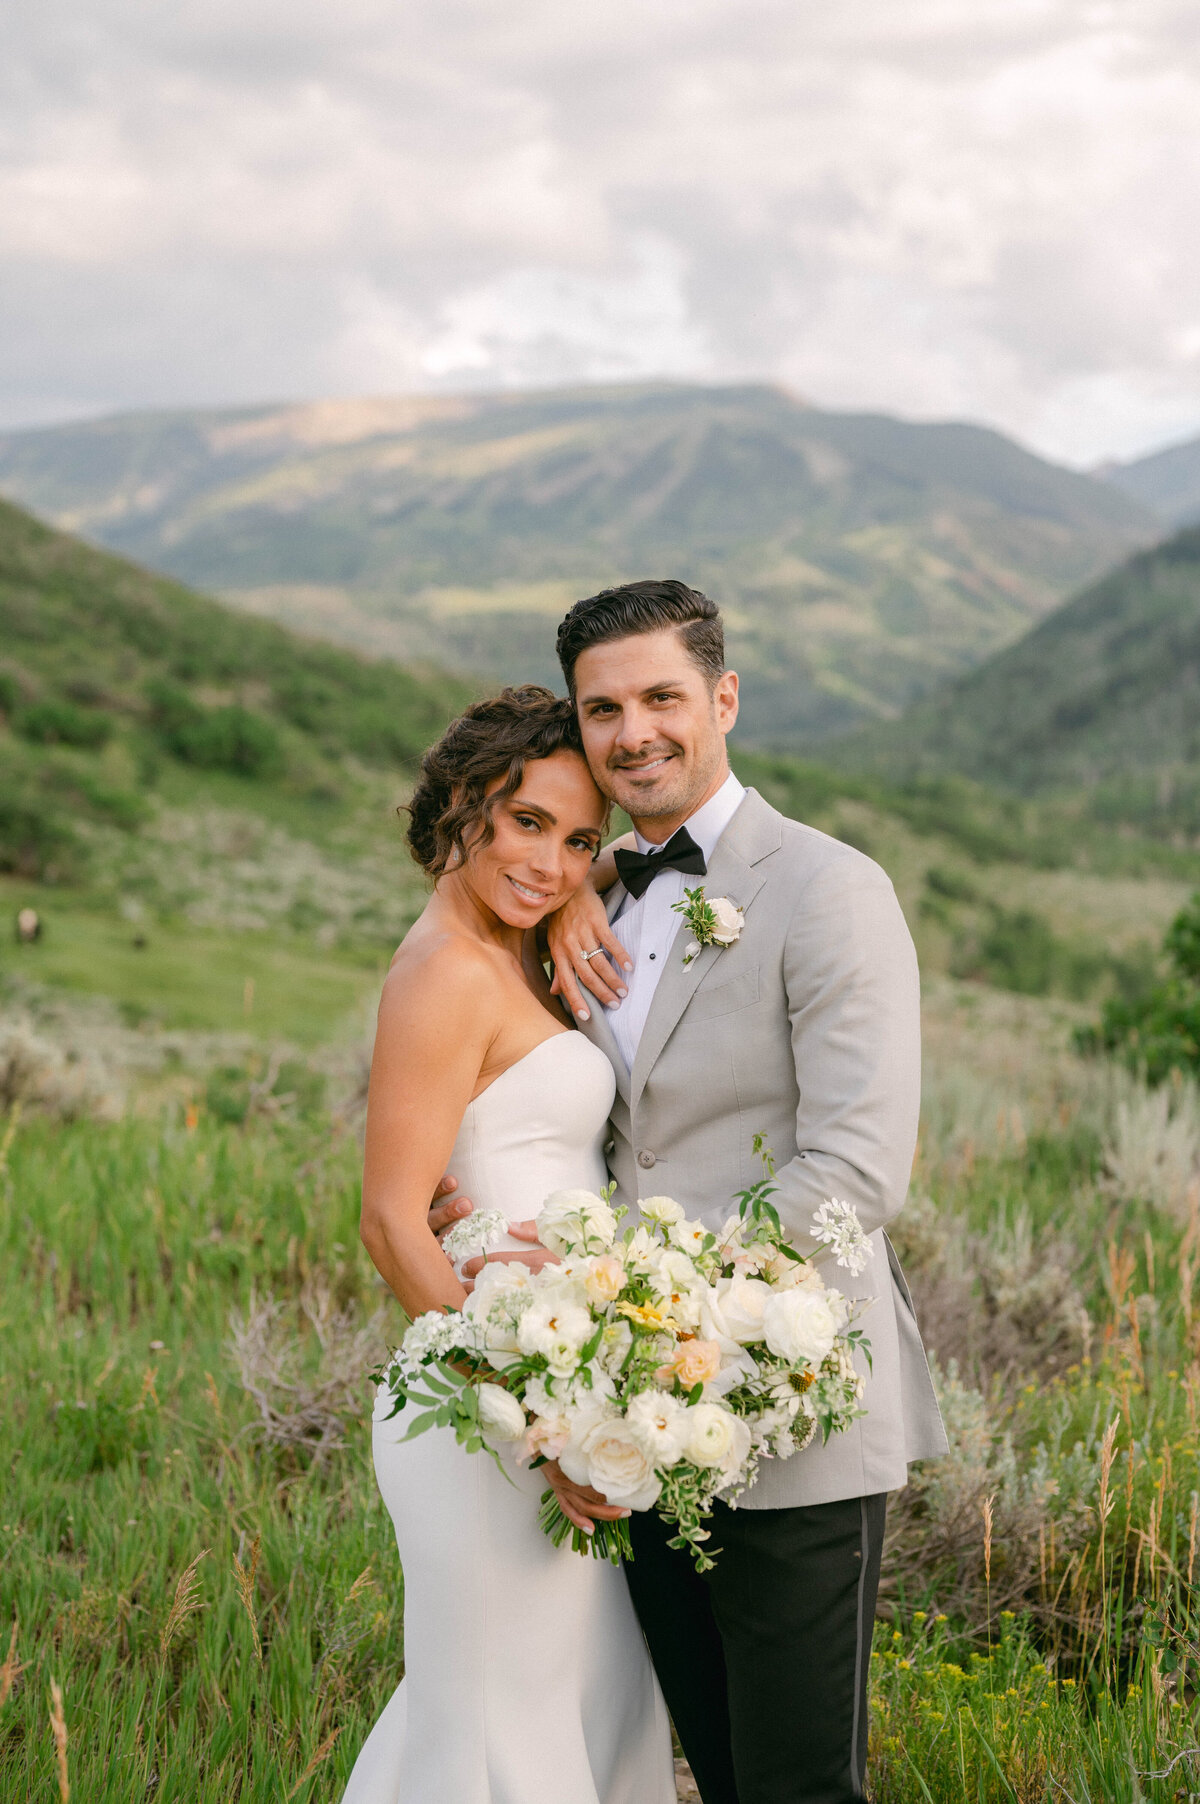 Lia-Ross-Aspen-Snowmass-Patak-Ranch-Wedding-Photography-by-Jacie-Marguerite-744